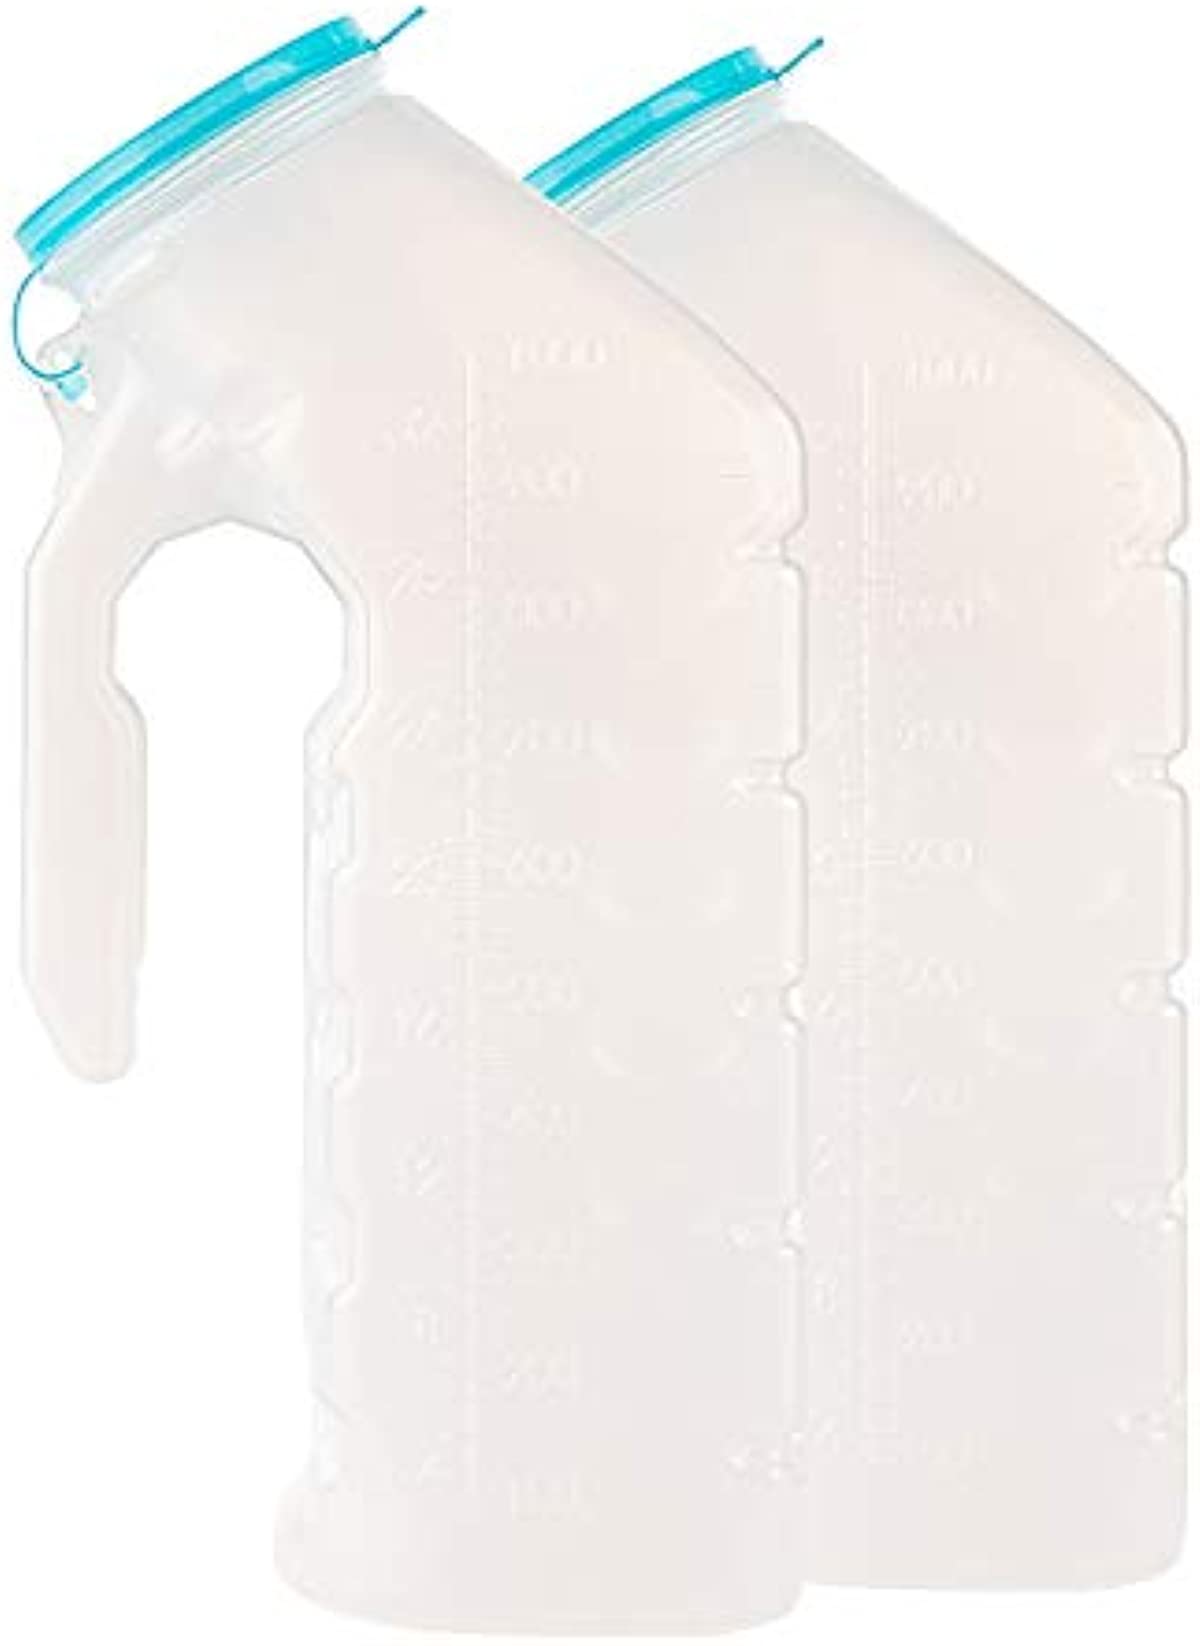 Male Urinal with Glow in The Dark Lid (2 Bottles) 32 Oz Urine Bottles for Men - Pee Bottles for Hospitals, Emergency and Travel